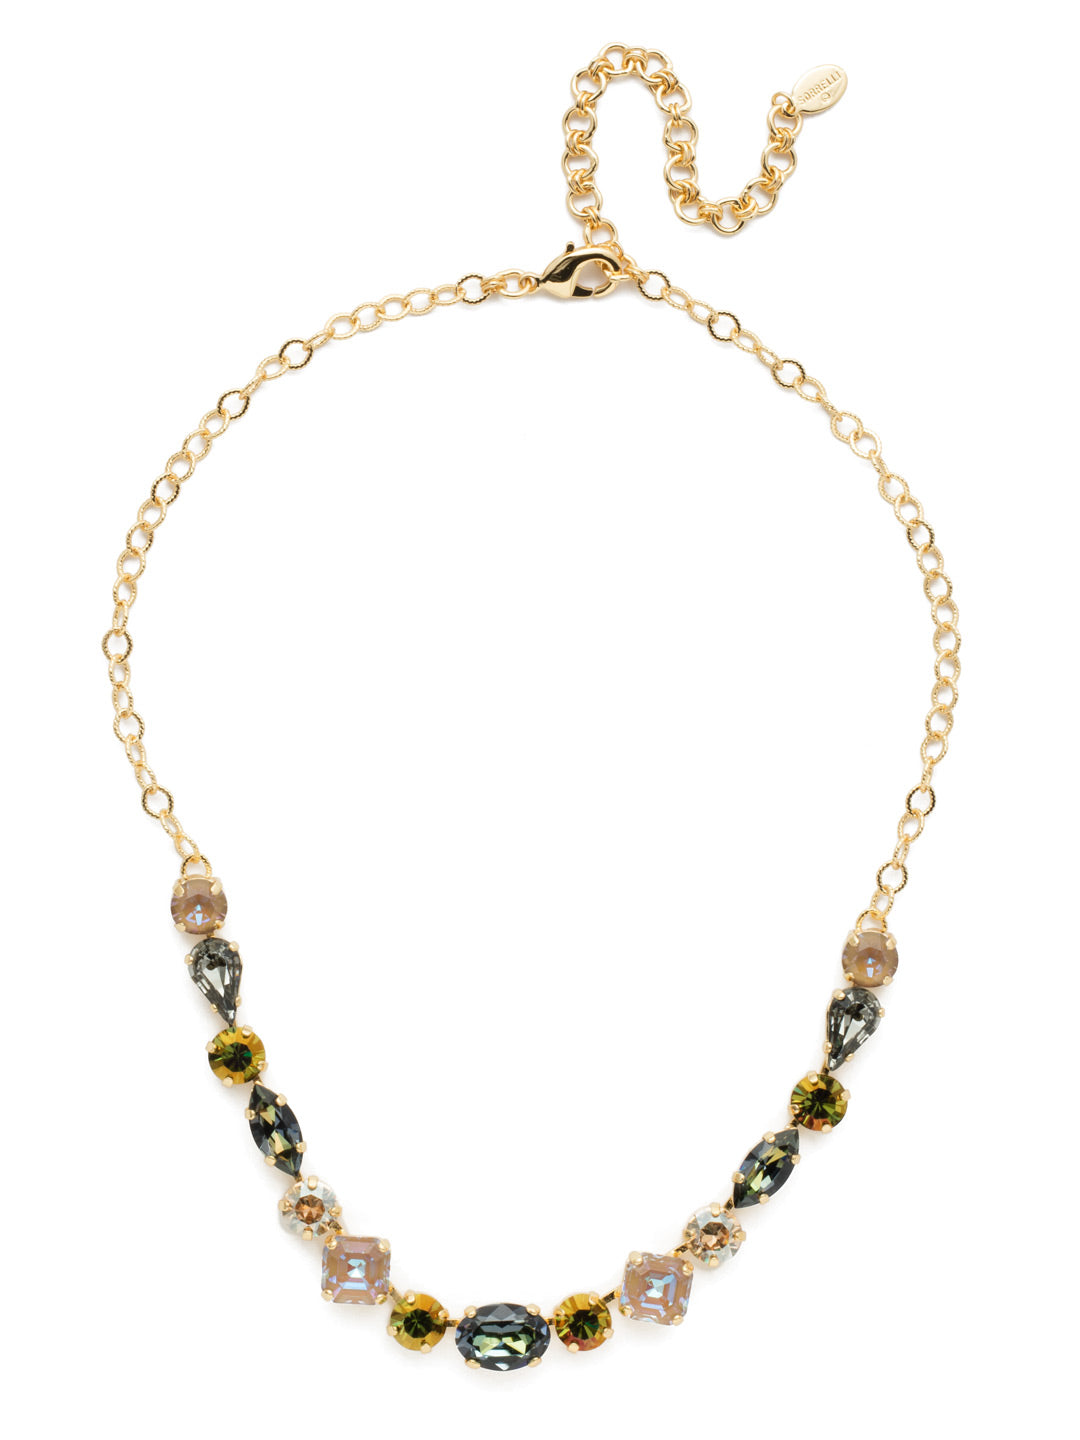 Martina Tennis Necklace - NET6BGCSM - Want to feel fabulous? Fasten on the Martina Tennis Necklace. It's big on sparkle with pear, navette, cushion emerald and round crystals. From Sorrelli's Cashmere collection in our Bright Gold-tone finish.